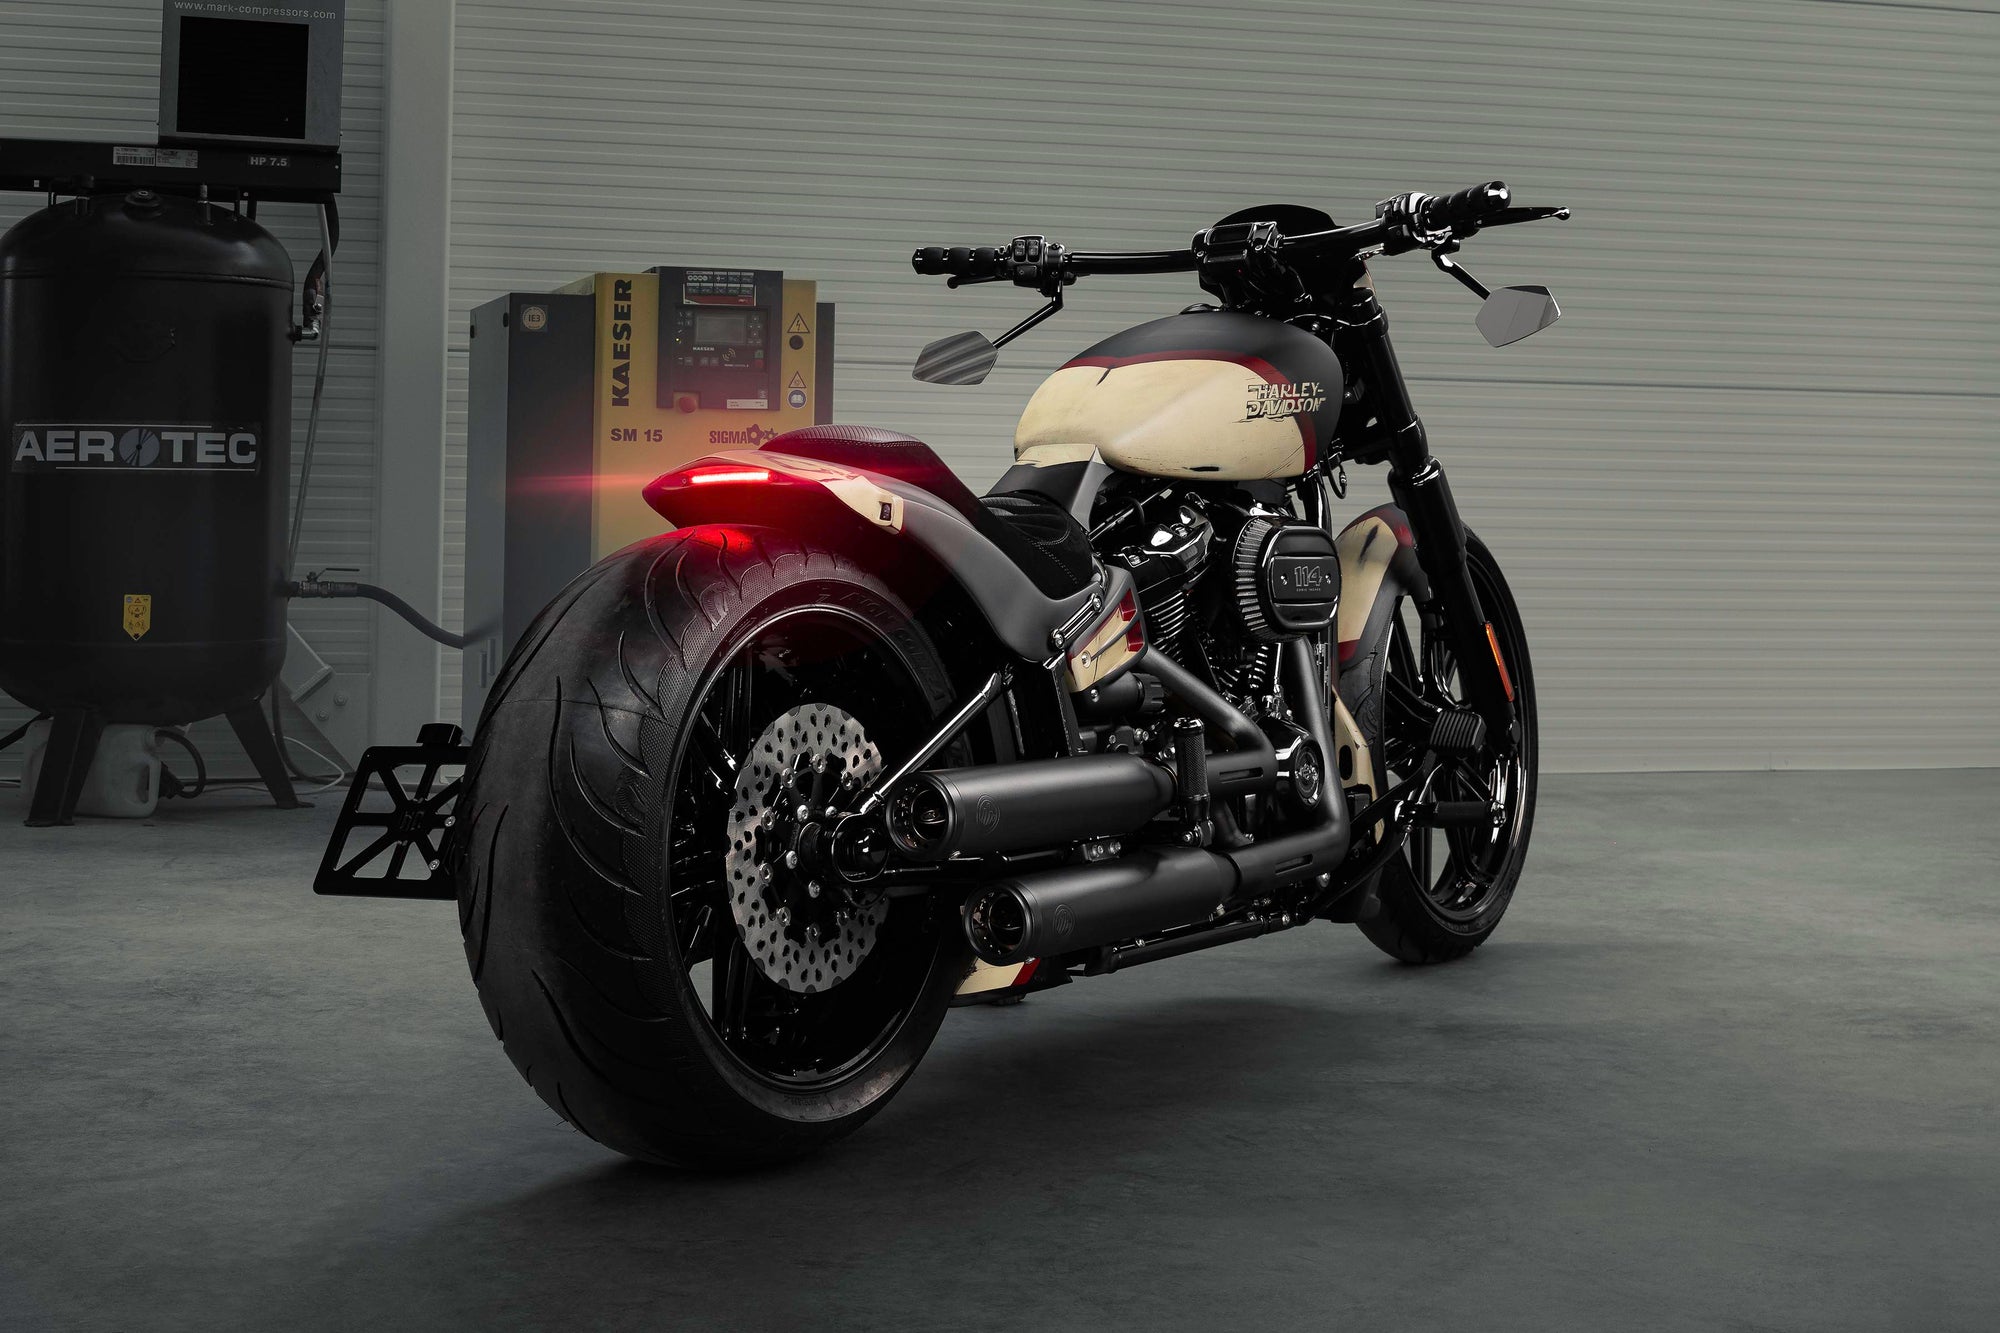 Modified Harley Davidson Breakout motorcycle with Killer Custom parts from the rear in a modern bike shop